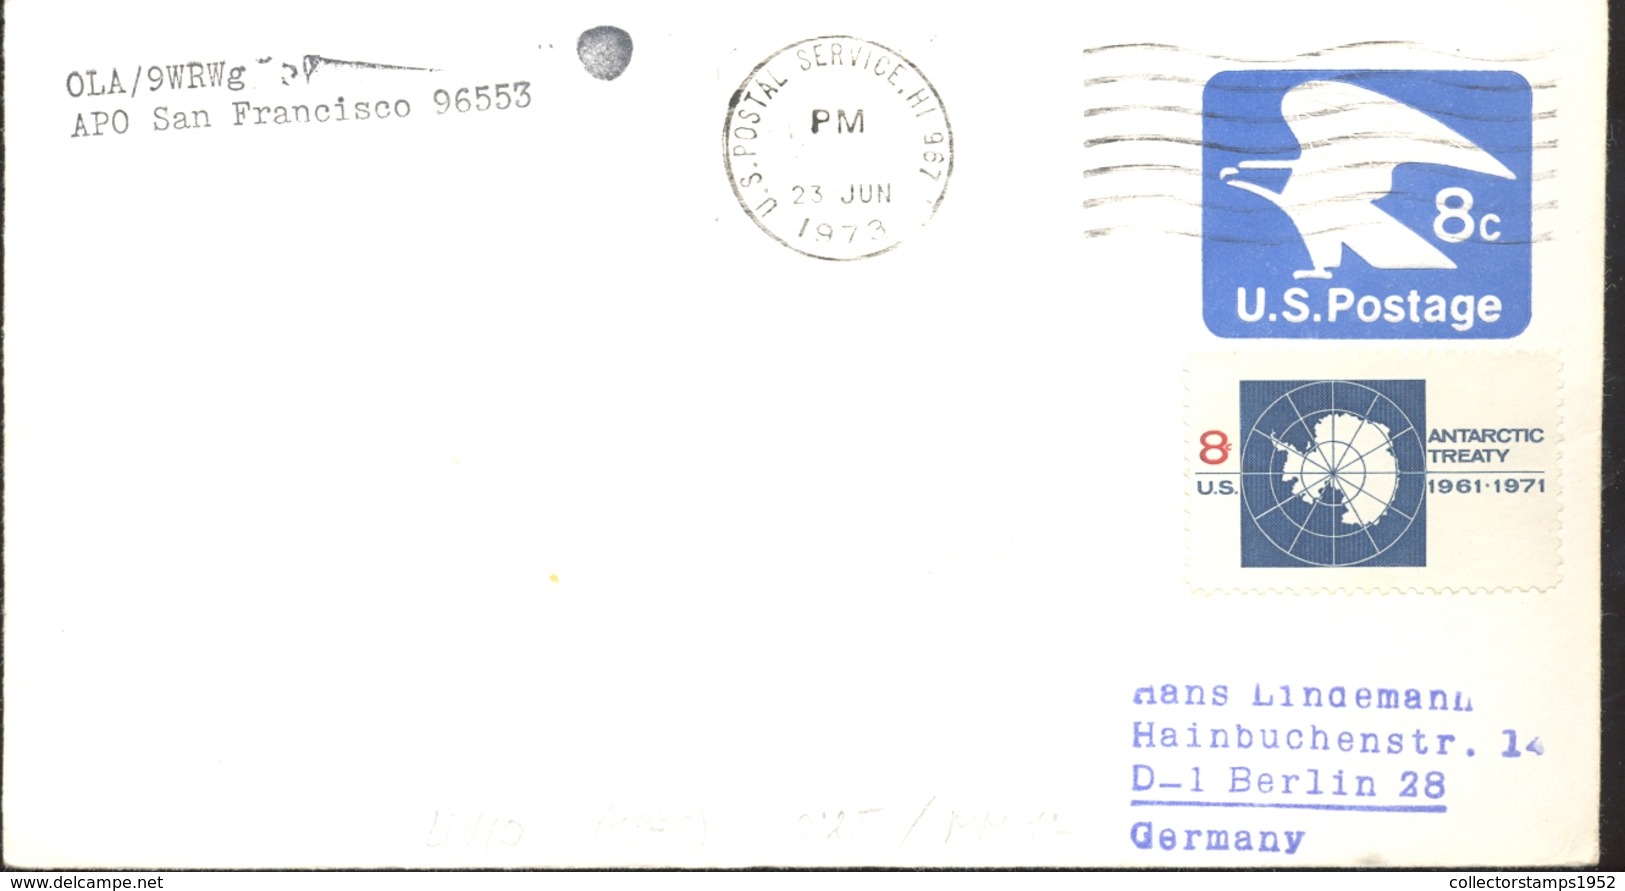 74312- ANTARCTIC TREATY, SOUTH POLE STAMP, EAGLE EMBOISED COVER STATIONERY, 1973, USA - Trattato Antartico